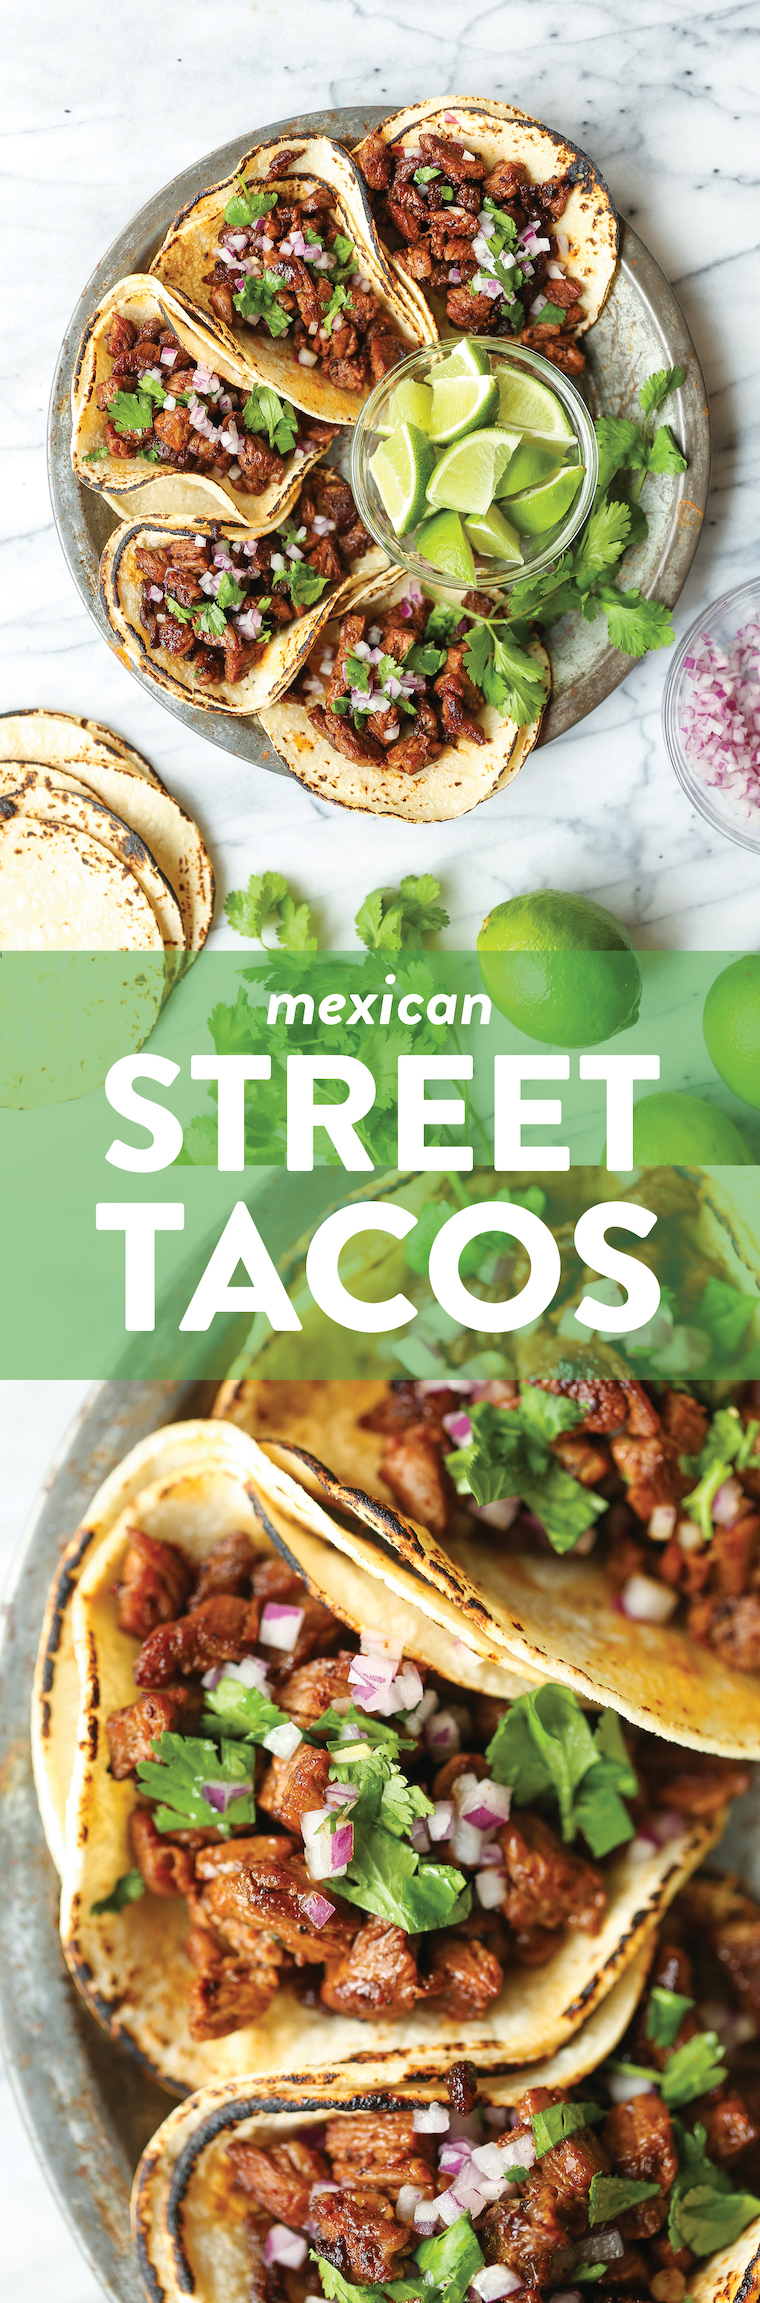 Mexican Street Tacos - Easy, quick, authentic carne asada street tacos you can now make right at home! Top with onion, cilantro + fresh lime juice! SO GOOD!